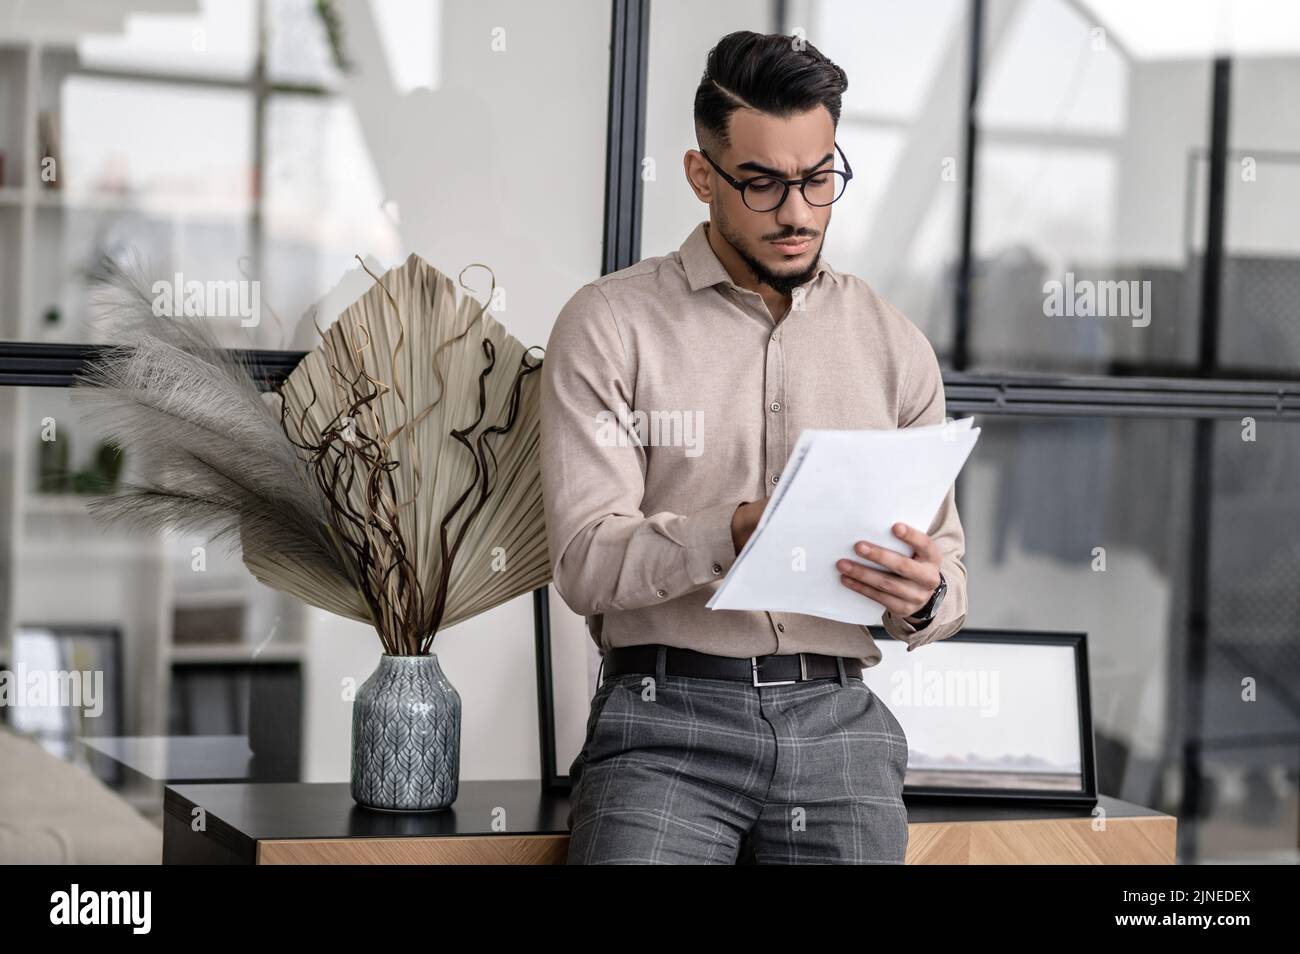 Man attentively looking at papers standing at home Stock Photo